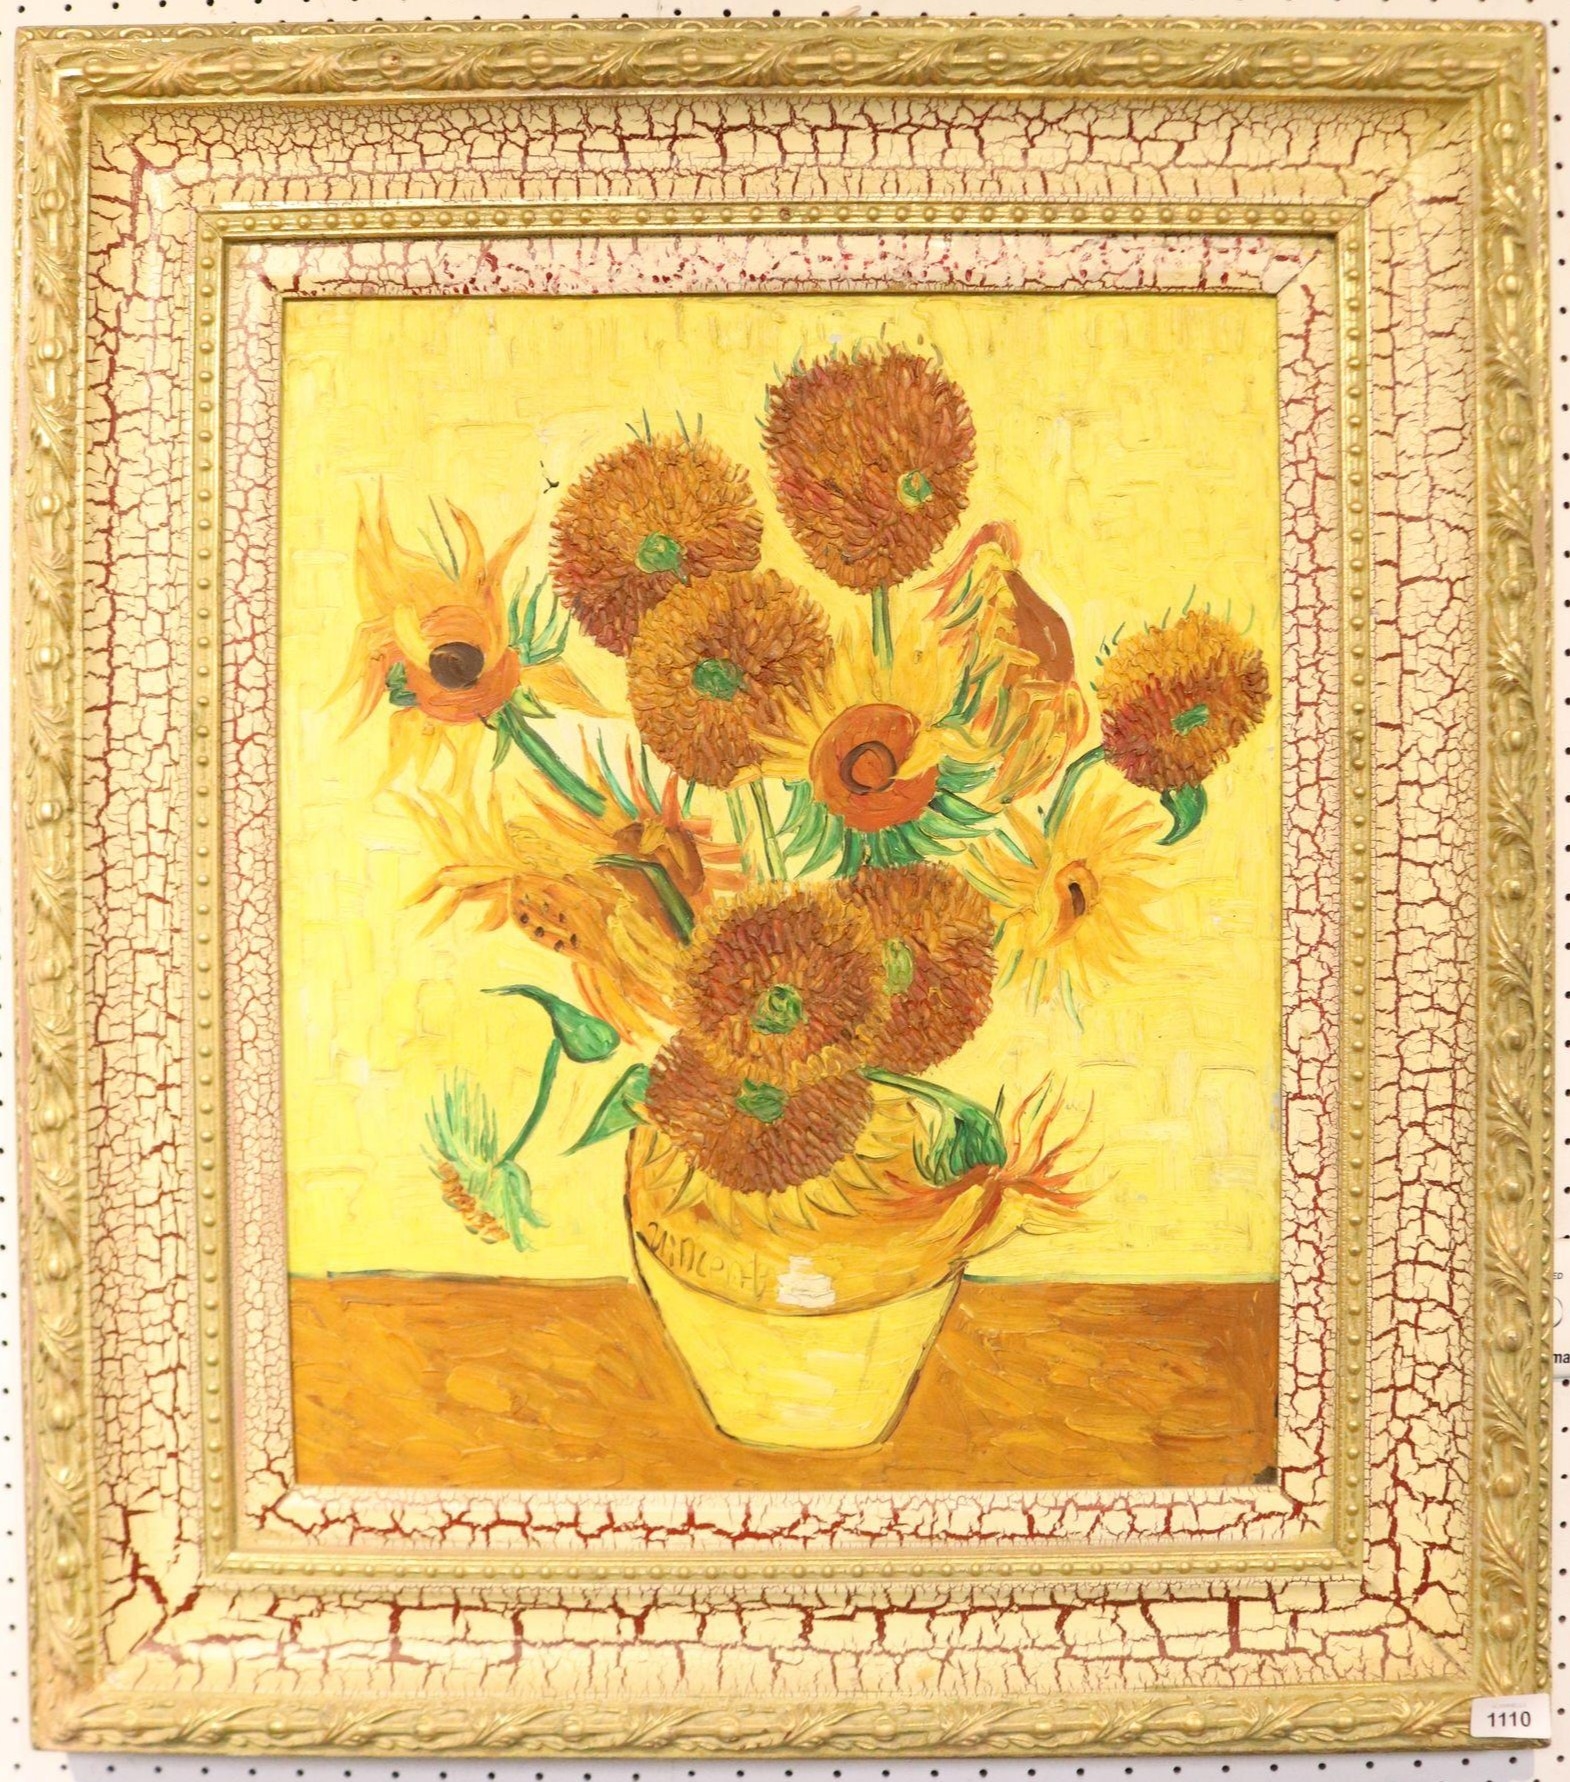 Van Gogh's Sunflowers: The unknown history